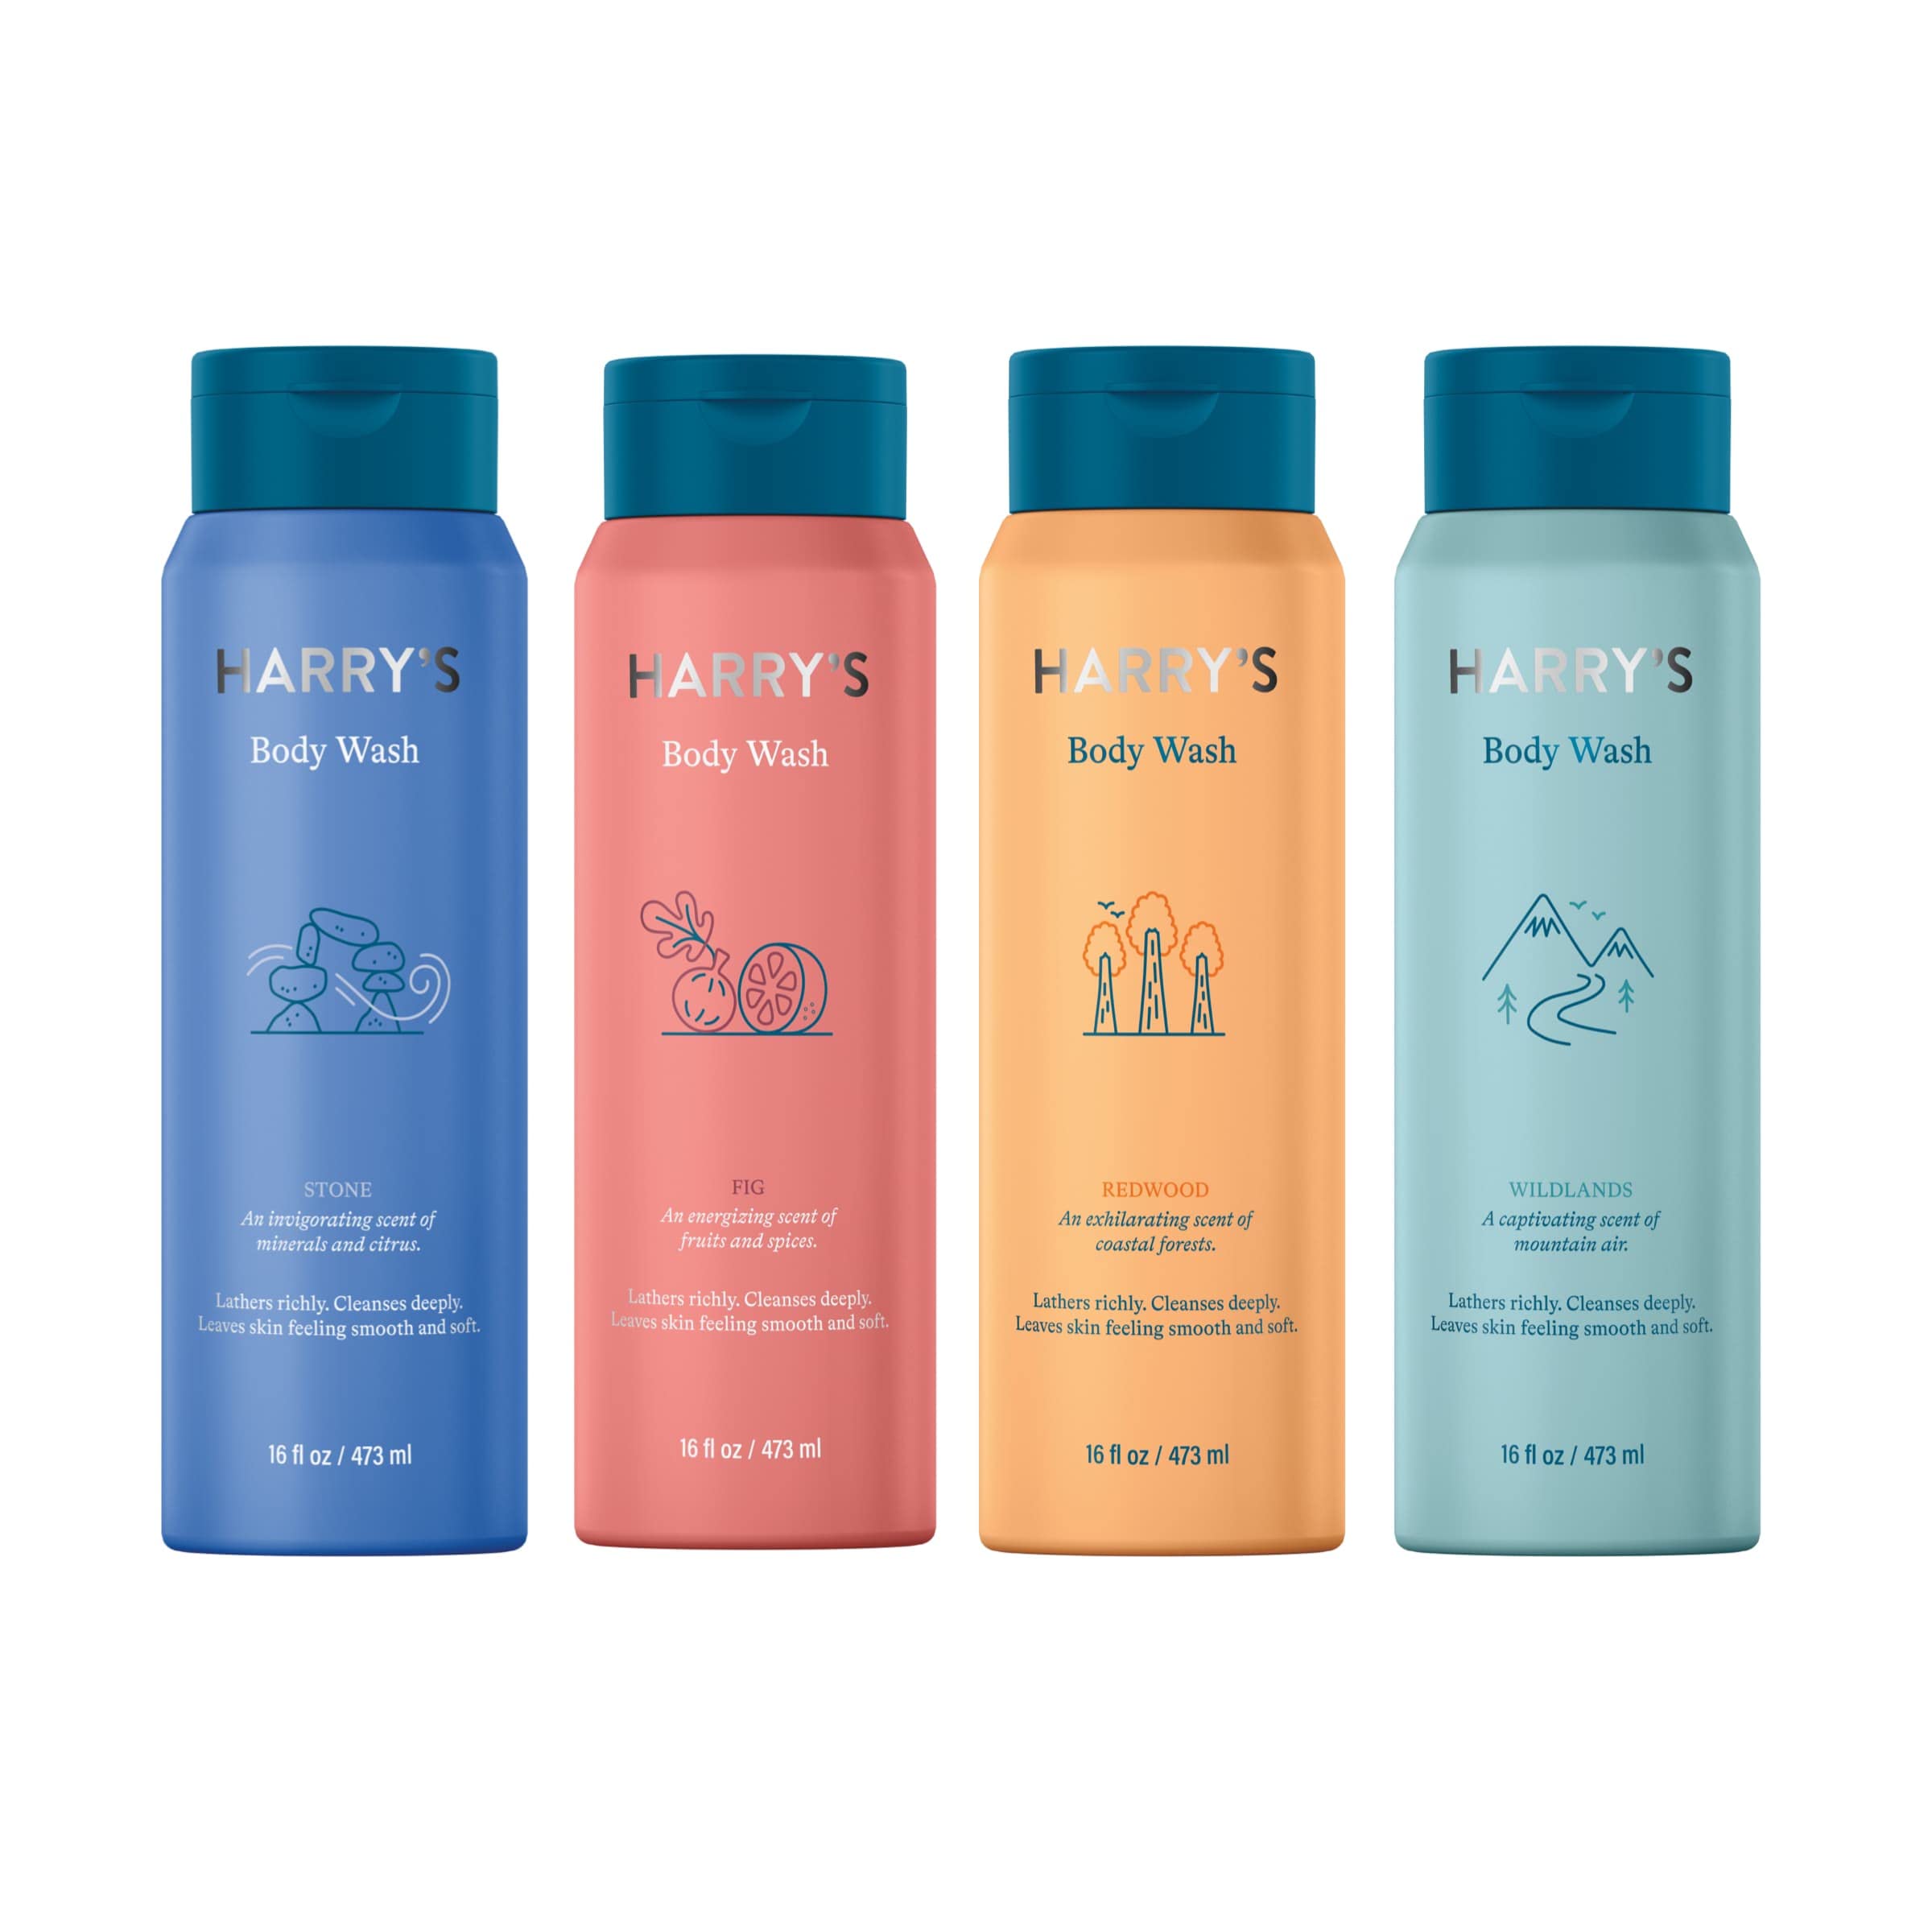 Recommend the Harry's body wash 3 pack. : r/Costco